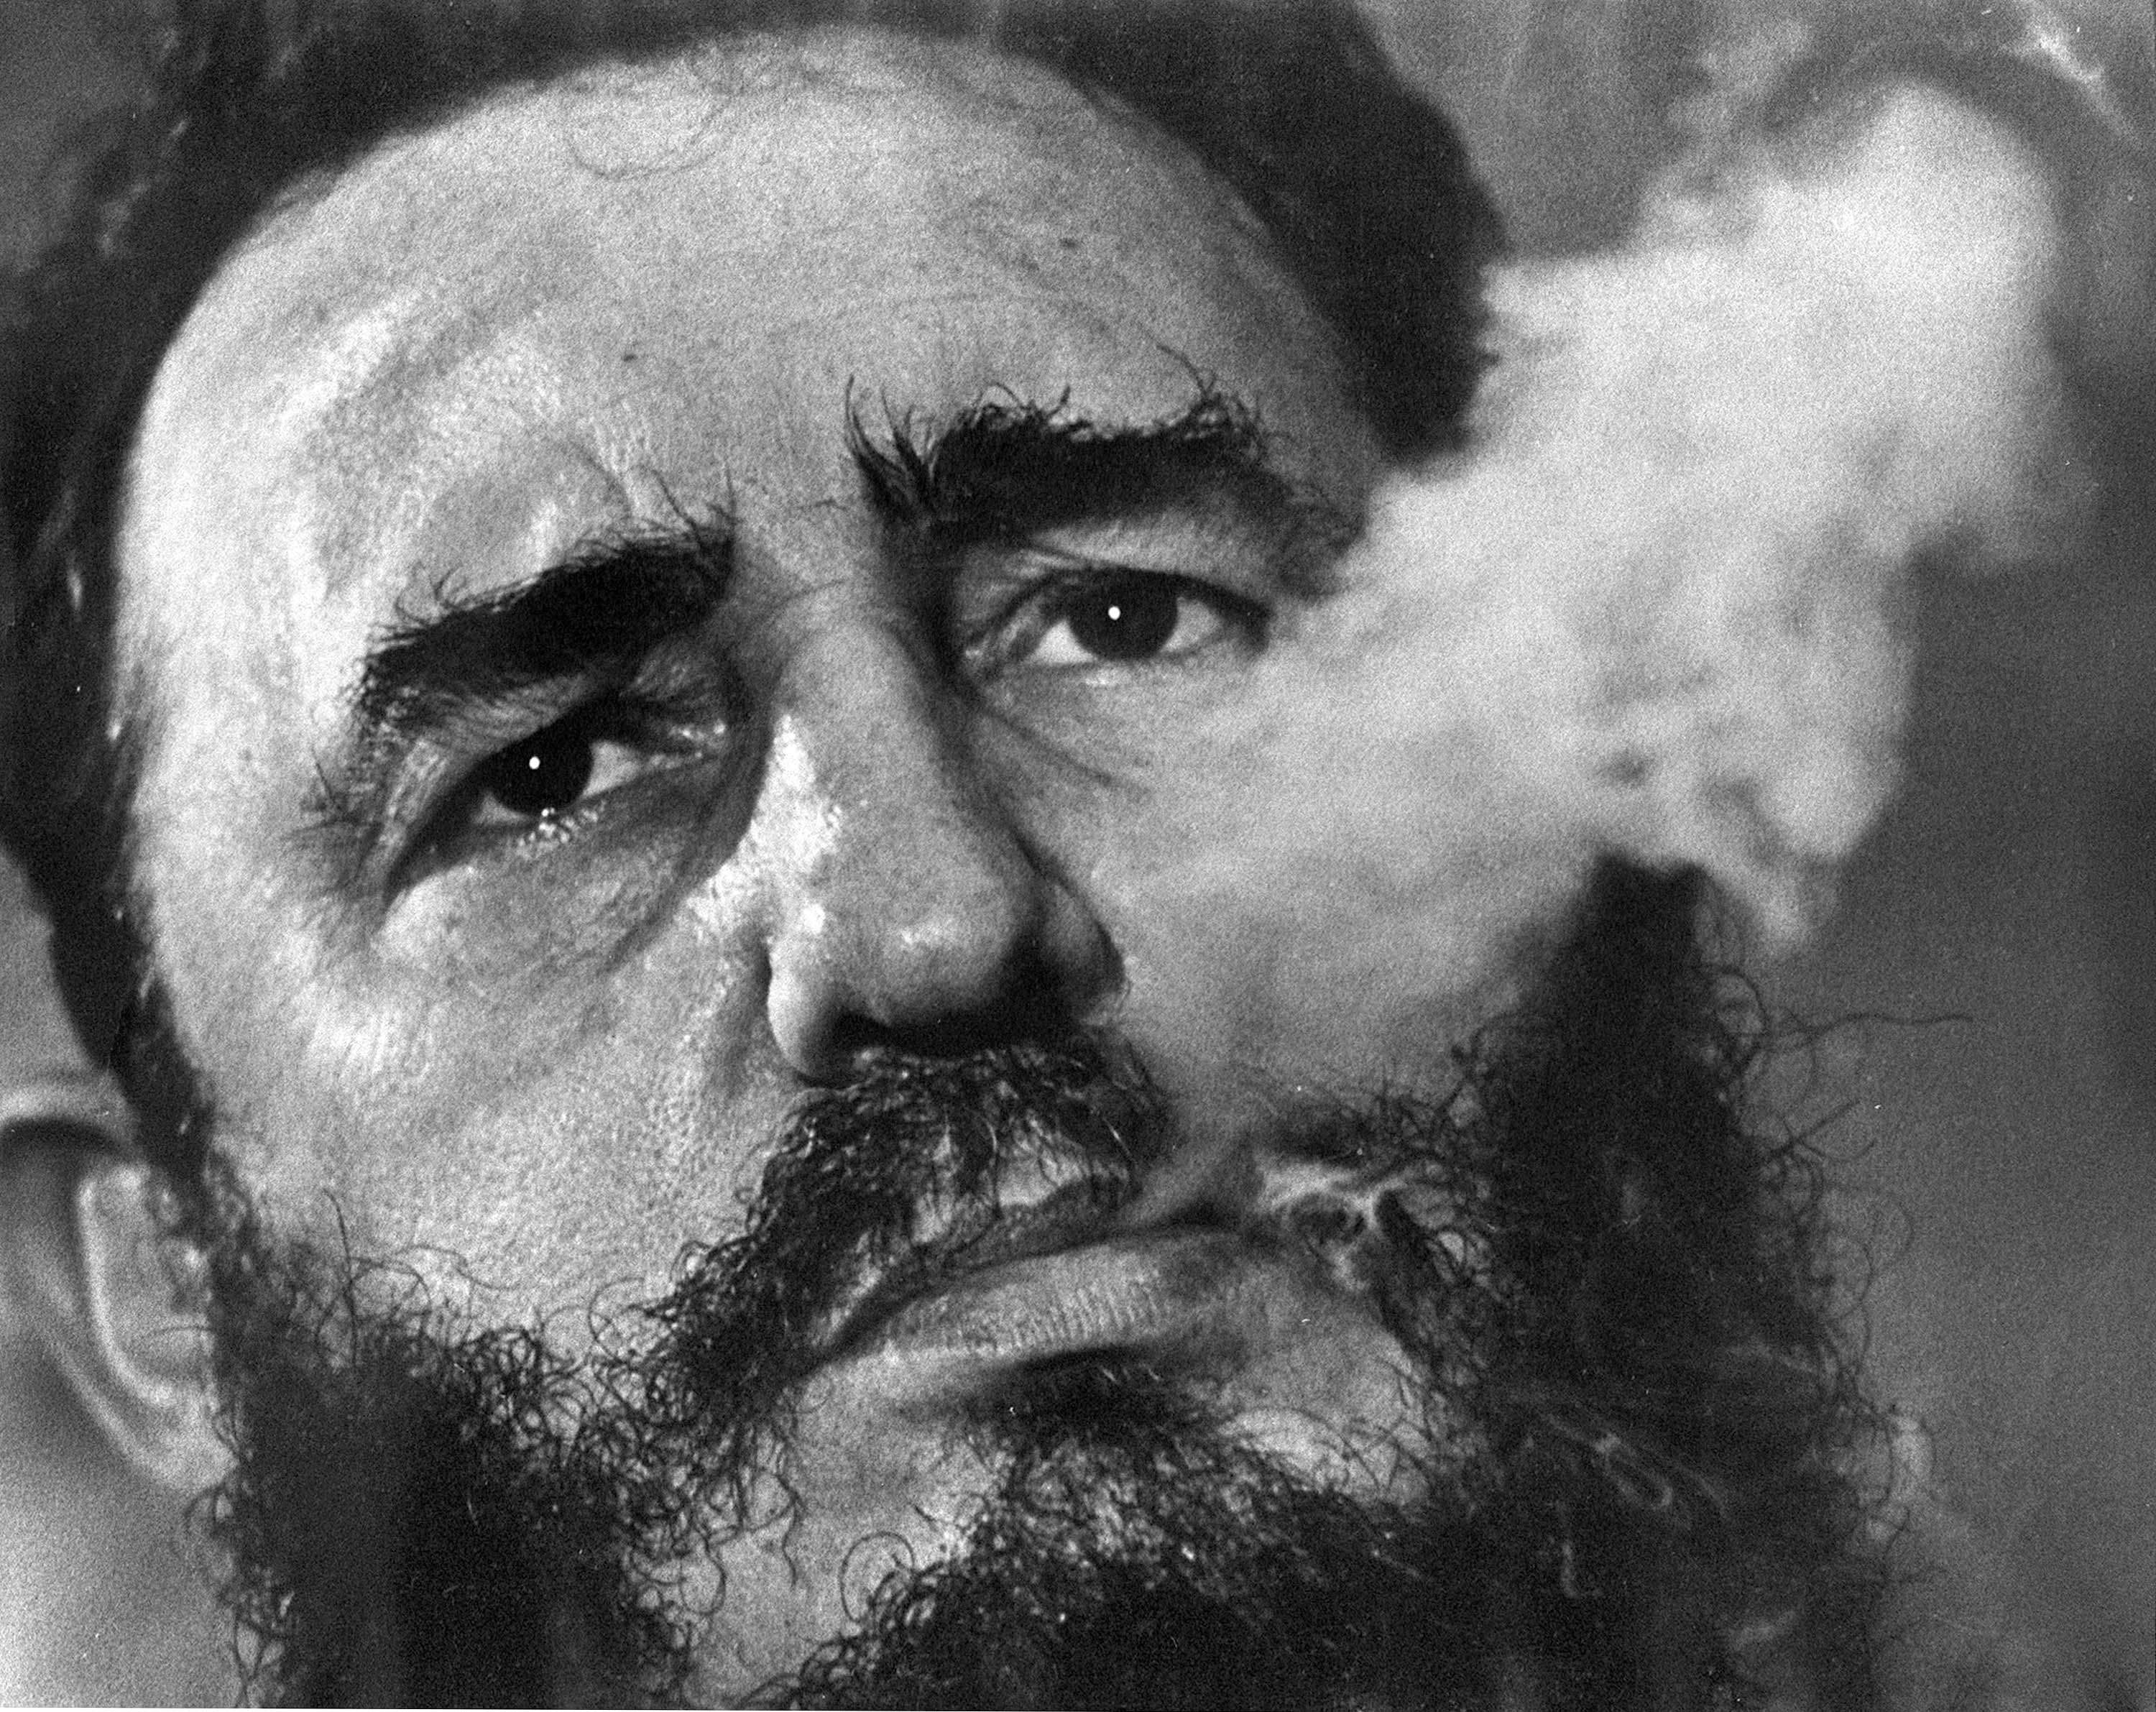 The CIA treated a box of cigars with a chemical that produced temporary disorientation, hoping Castro would light up a stogie before a speech and make a fool of himself. Photo: AP